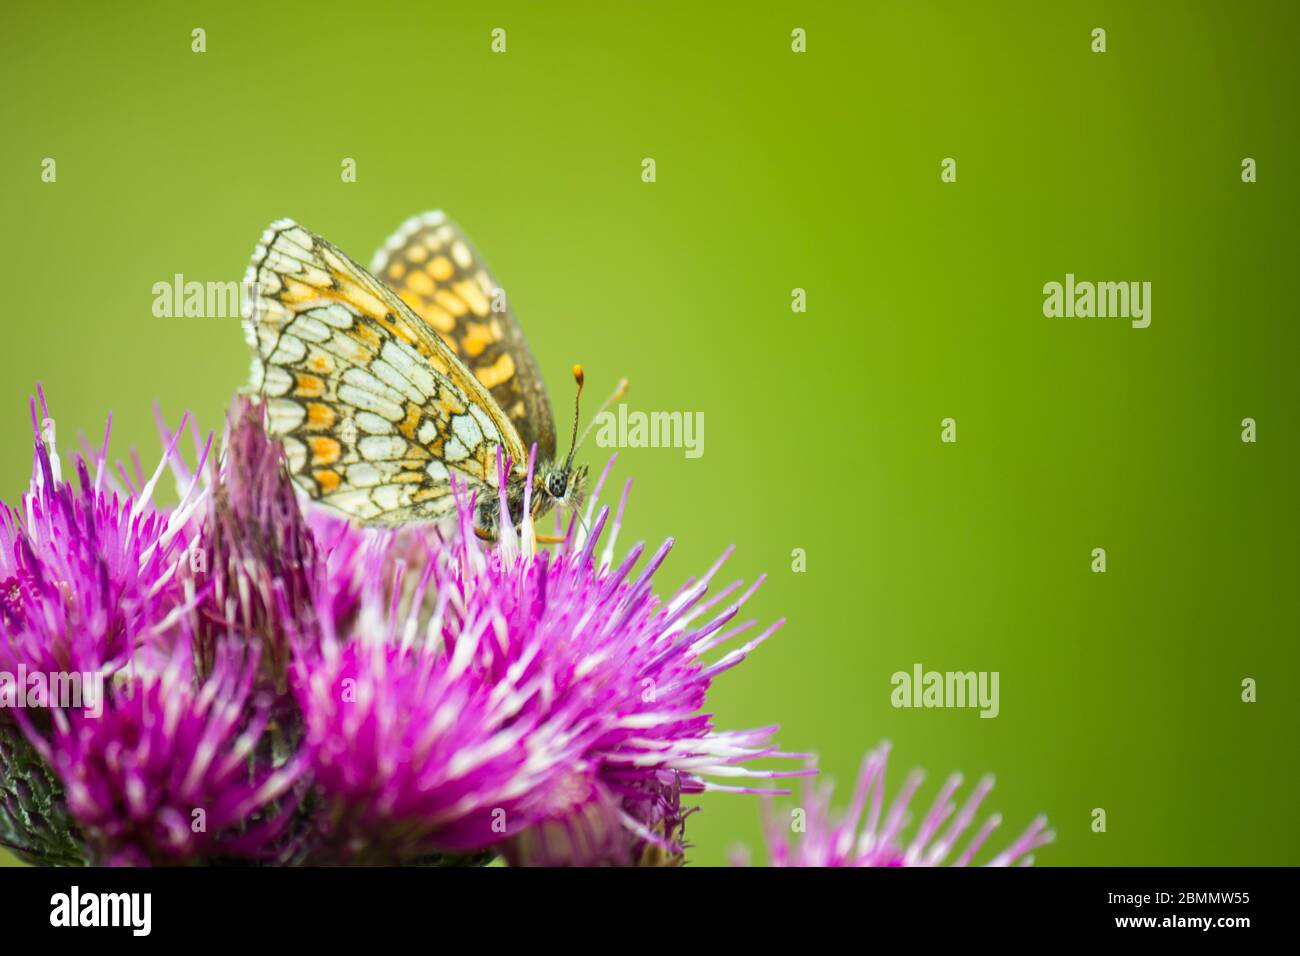 Colorful macro of a Heath fritillary butterfly (Melitaea athalia) sitting on a thistle flower with green blurred background Stock Photo